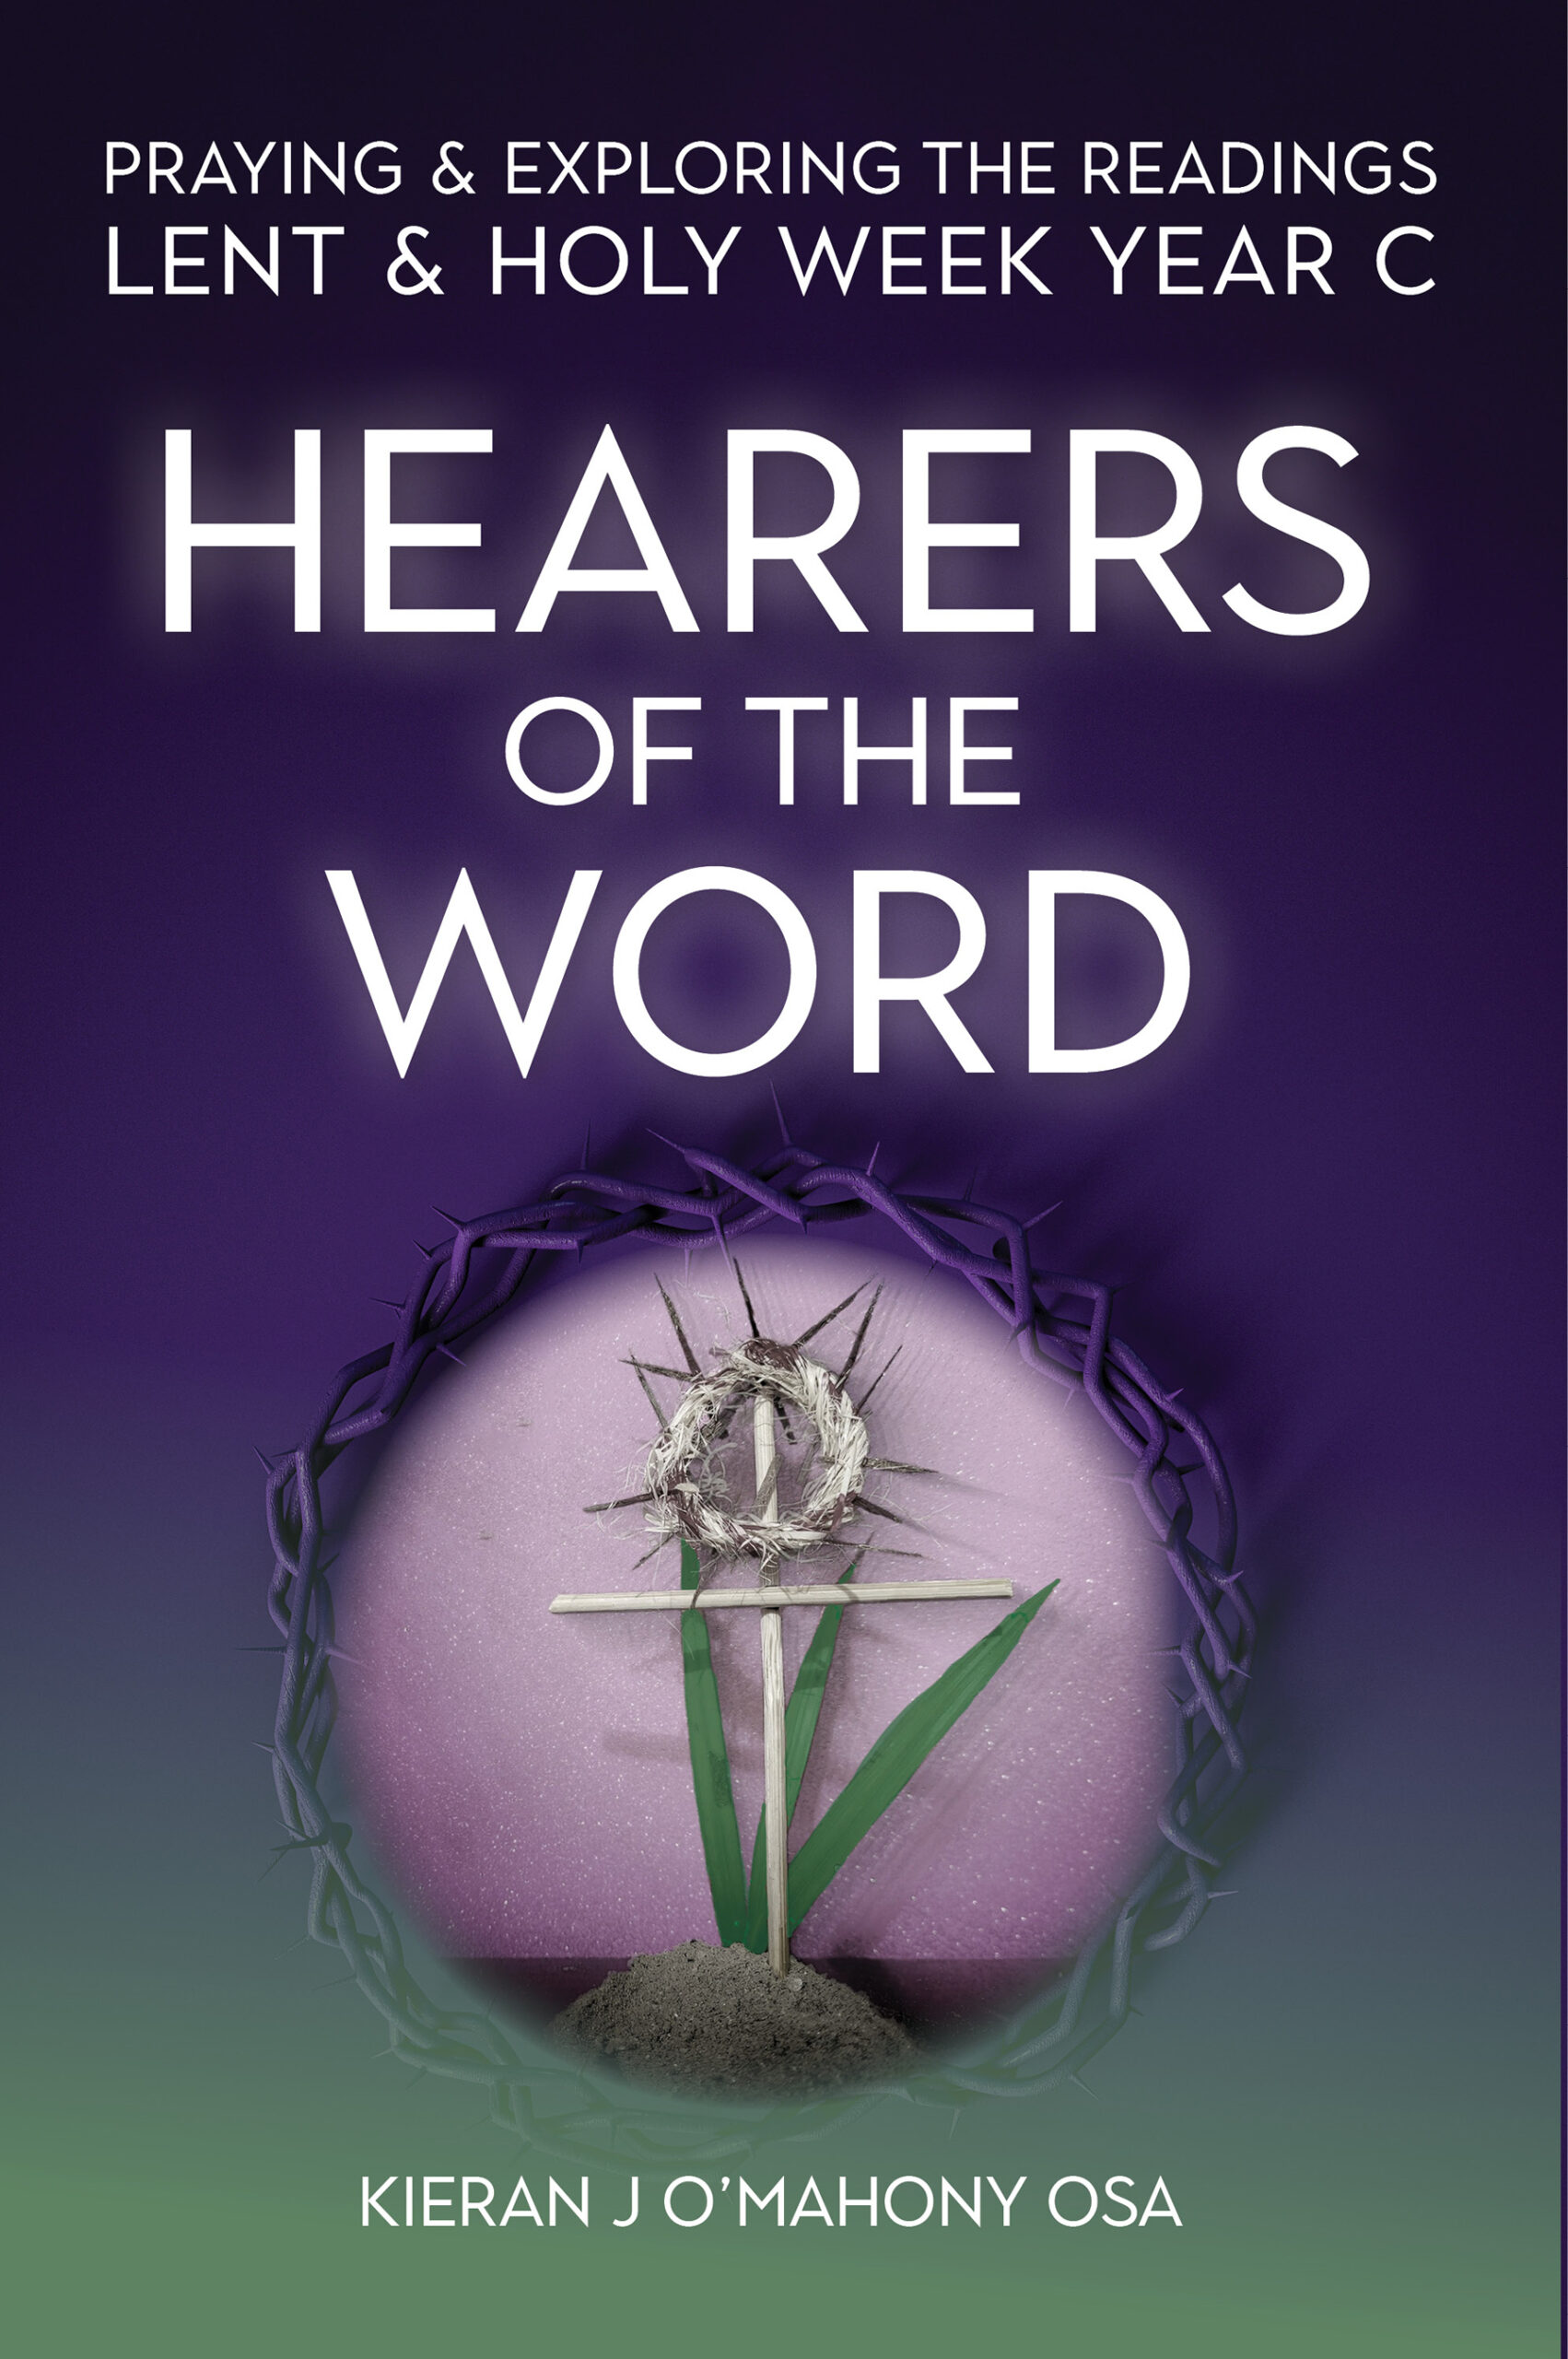 Hearers of the Word: Praying & Exploring the Readings for Lent & Holy Week Year C